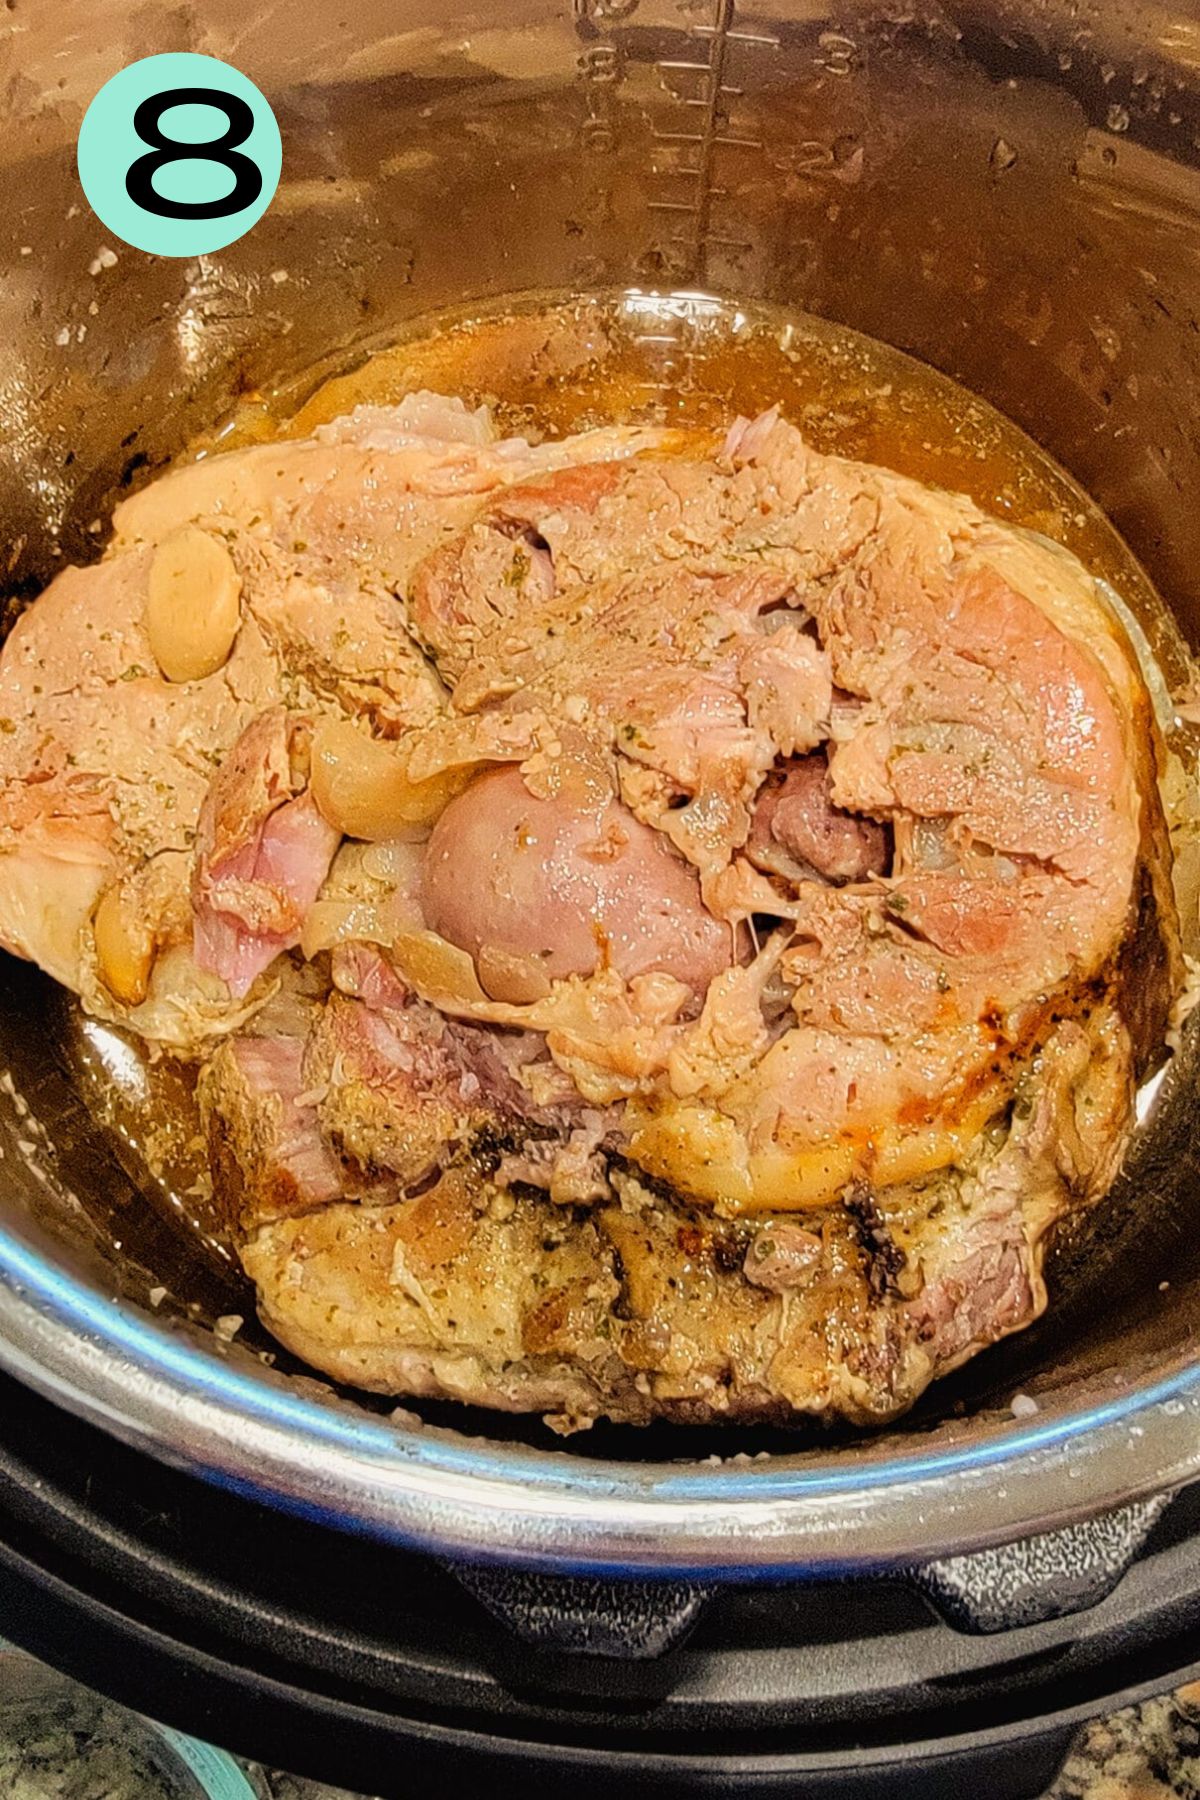 Already cooked Pernil, showing the bone and meat beginning to fall apart.